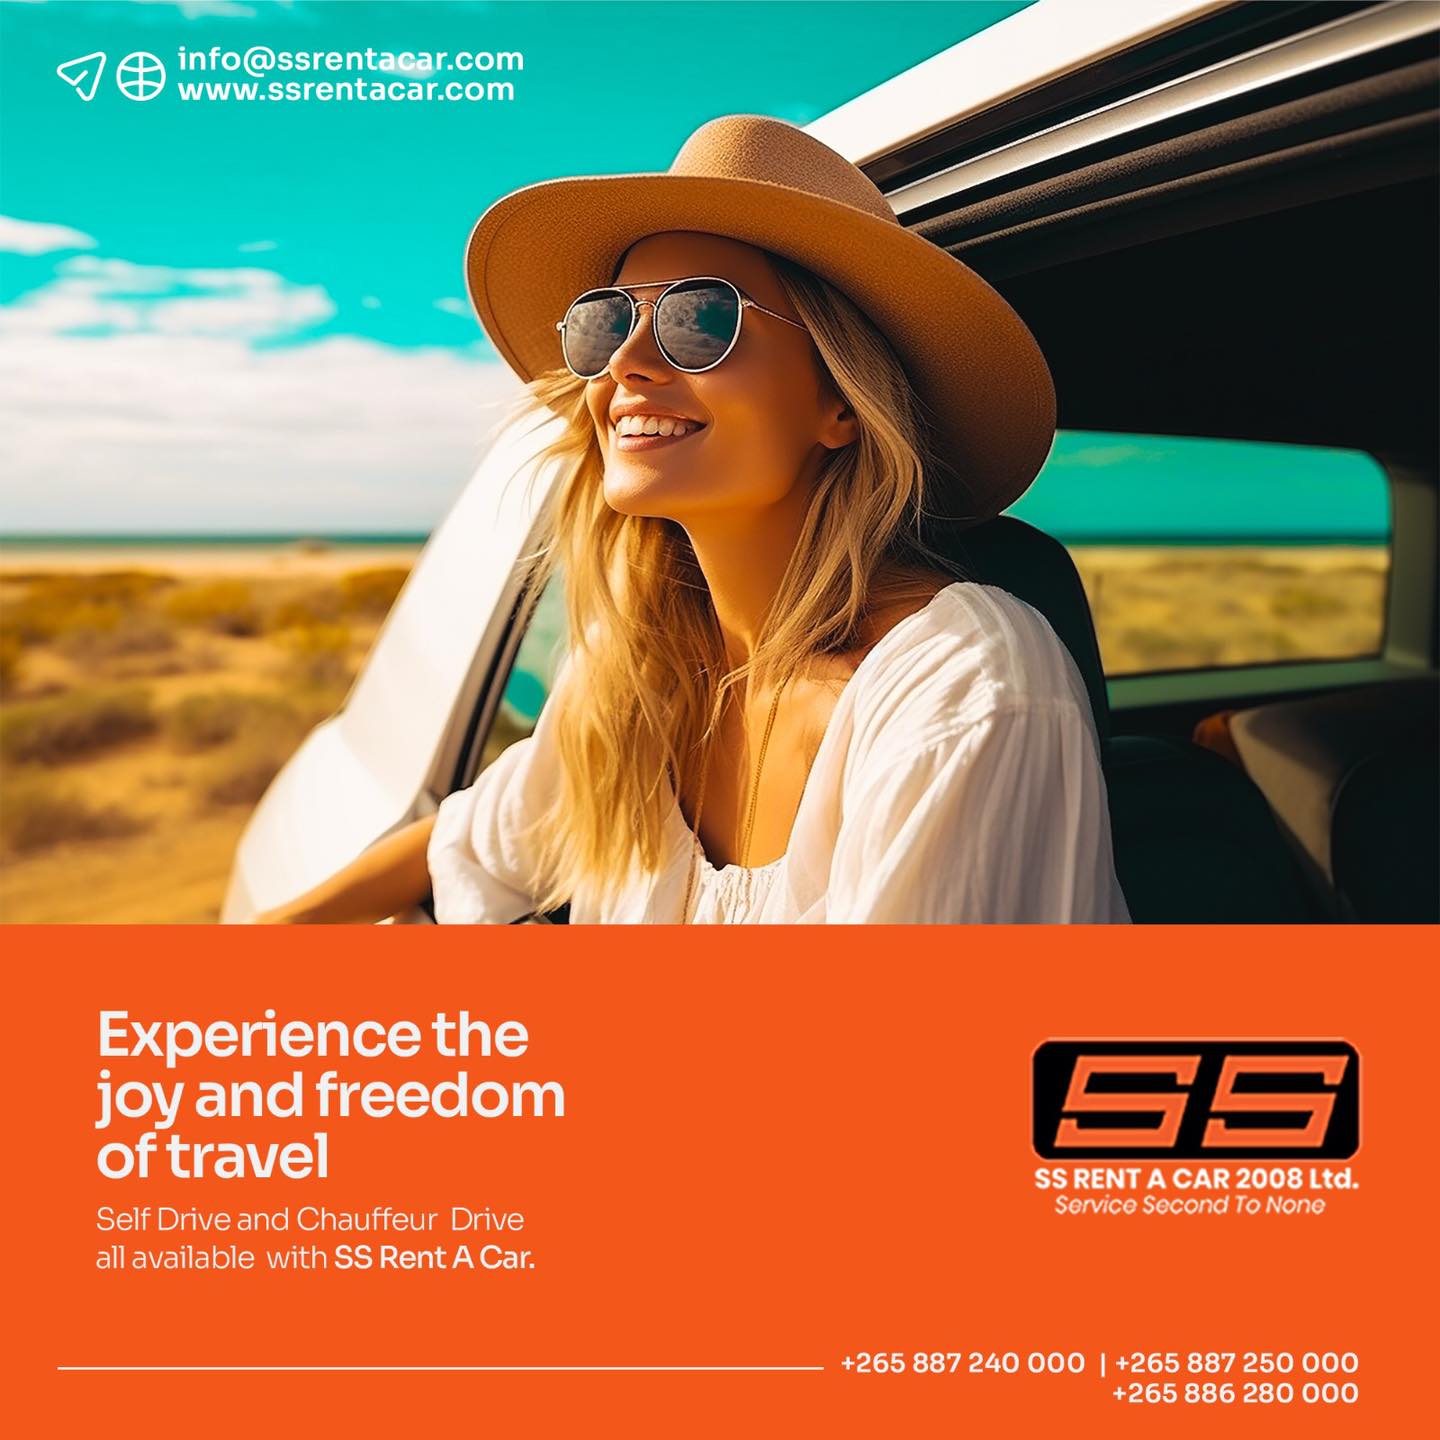 Experience the joy and freedom of travel...